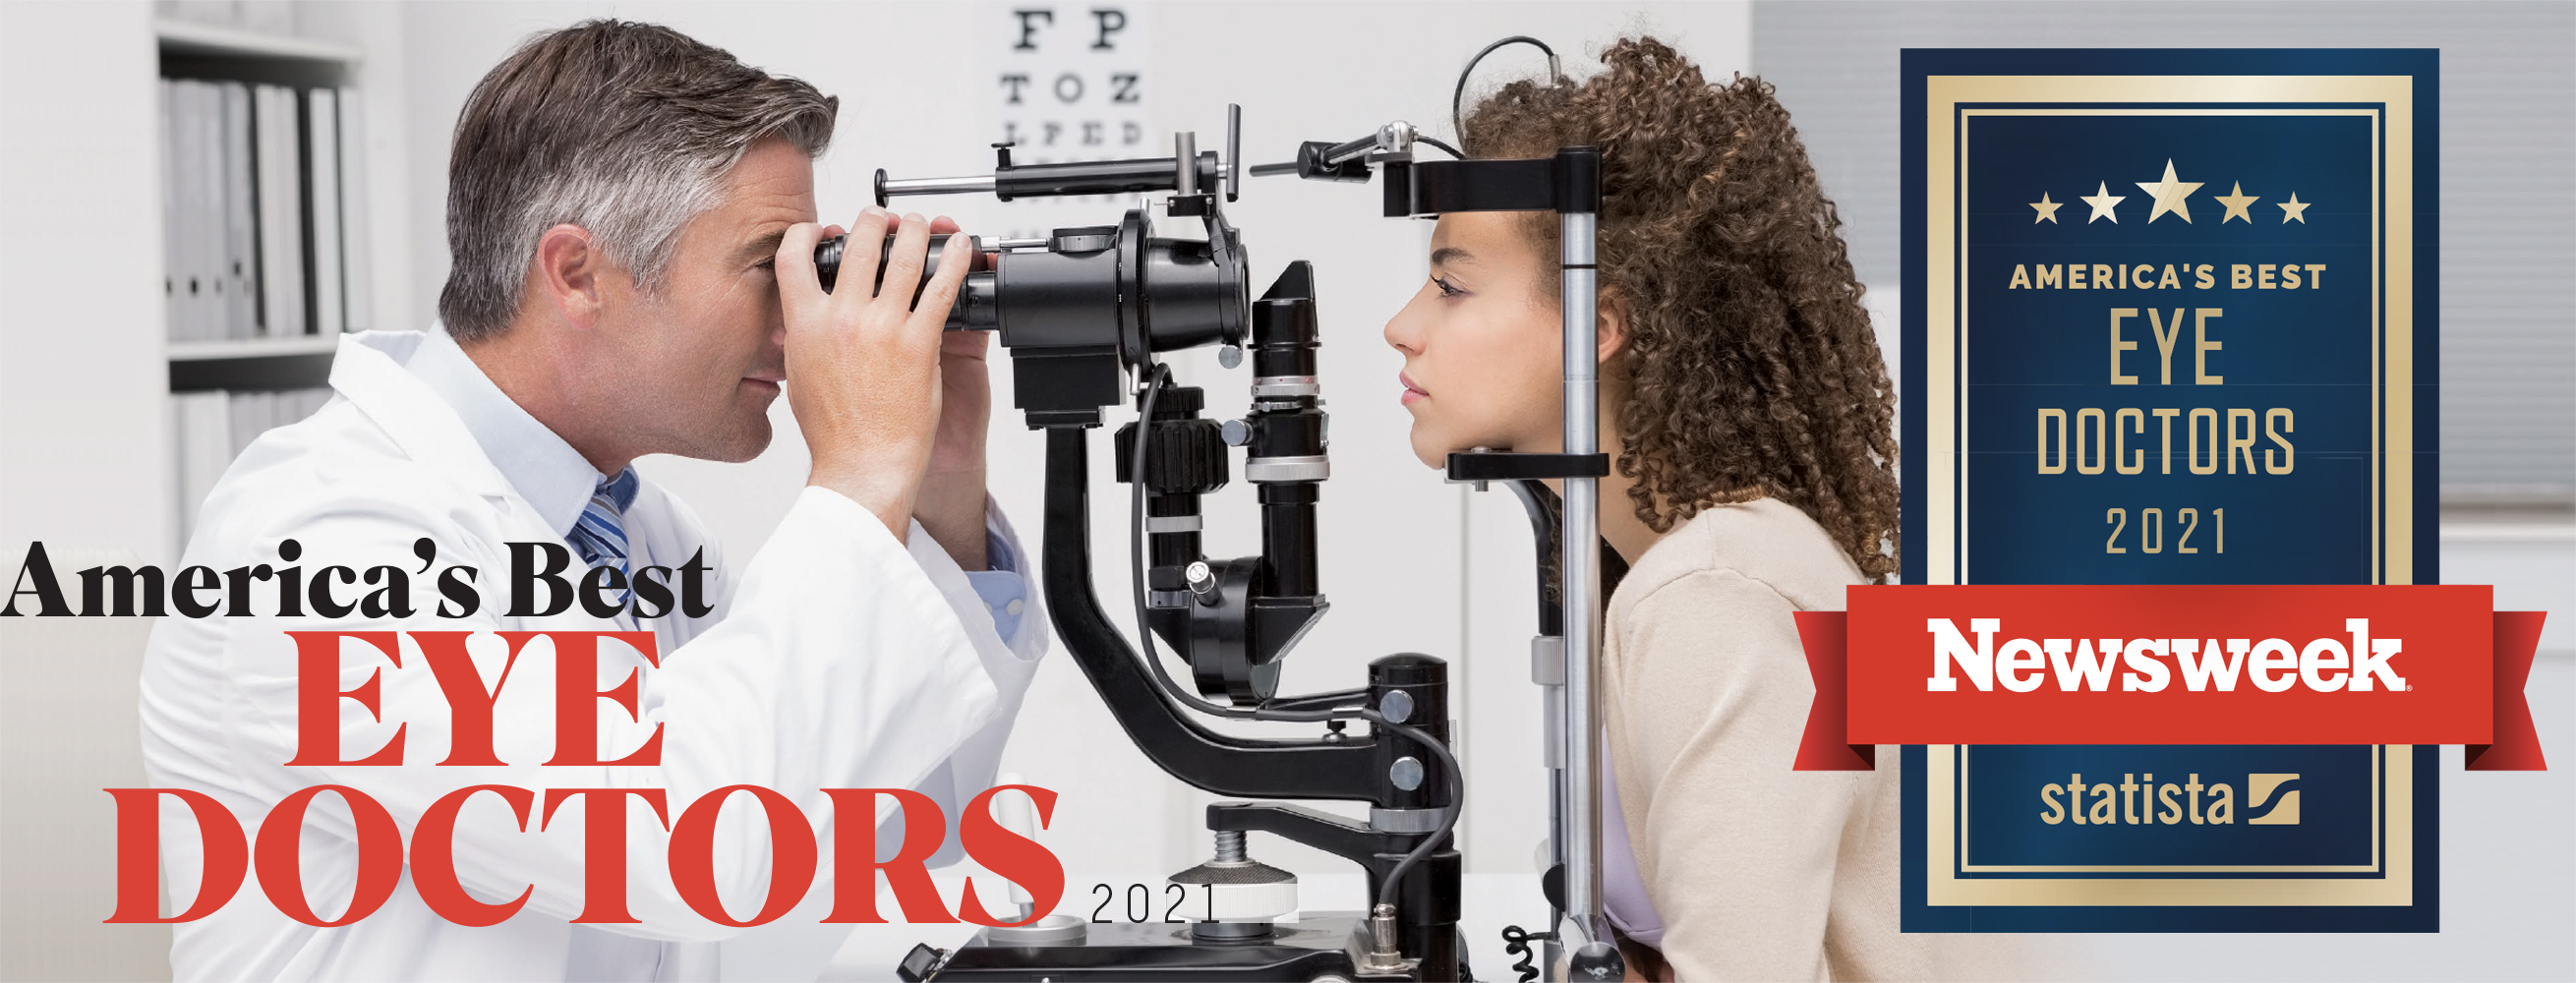 America's Best Eye Doctors 2021 - Ophthalmologists